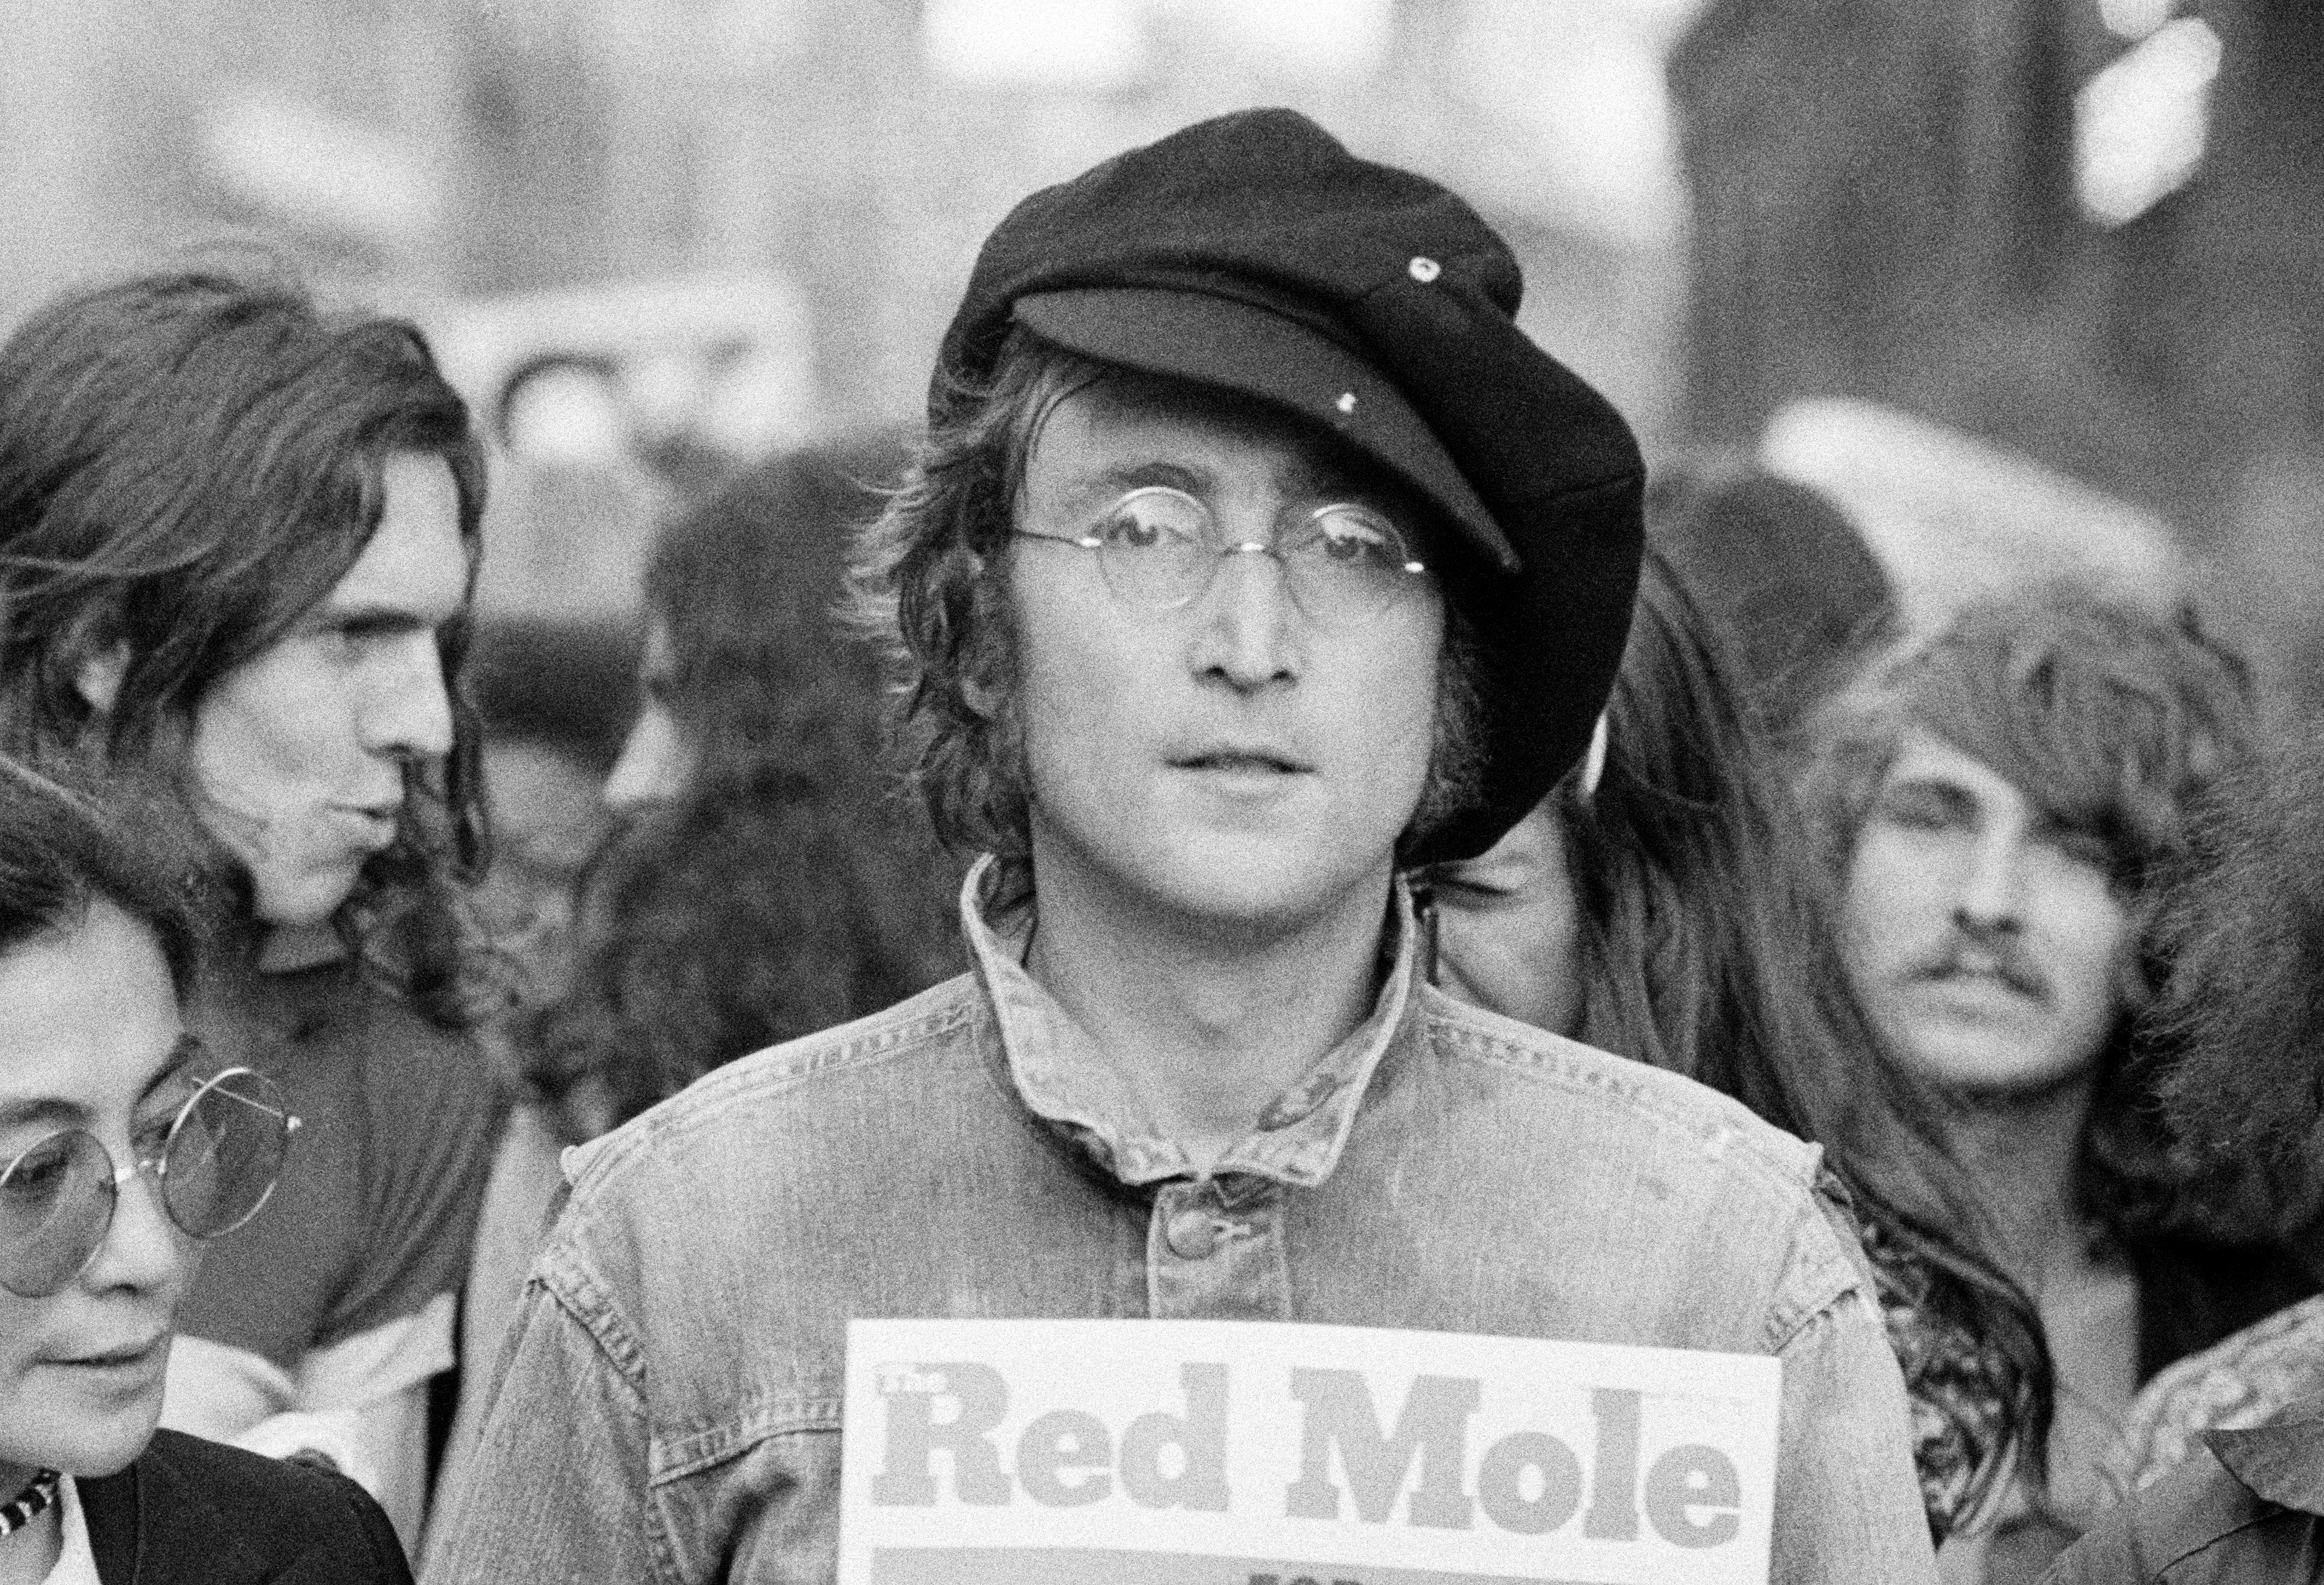 John Lennon and Yoko Ono (to his left) in London's Hyde Park, 1975 (Photo: Rowland Scherman/Getty Images)